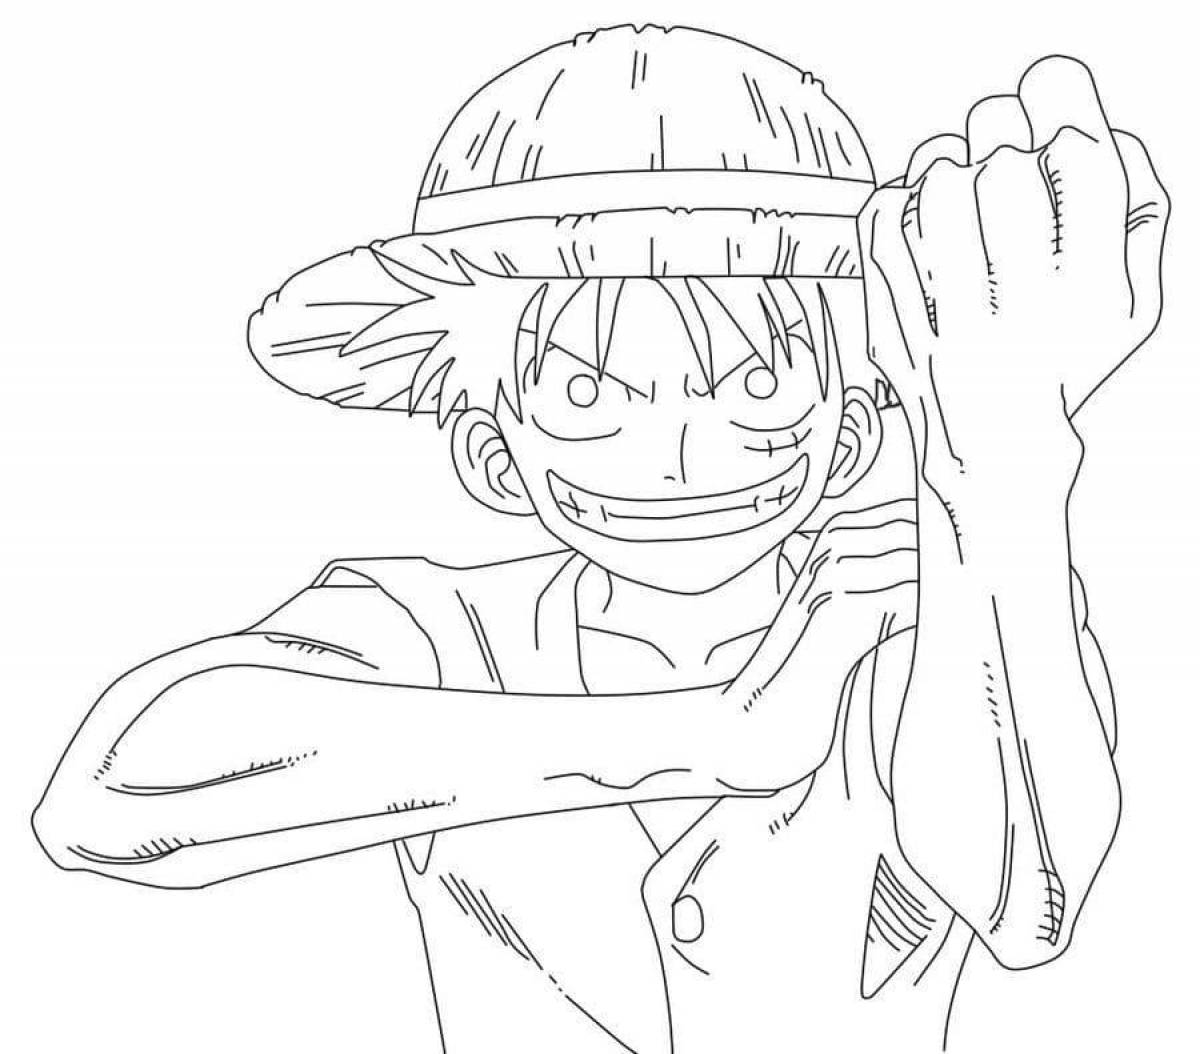 Adorable one piece coloring page